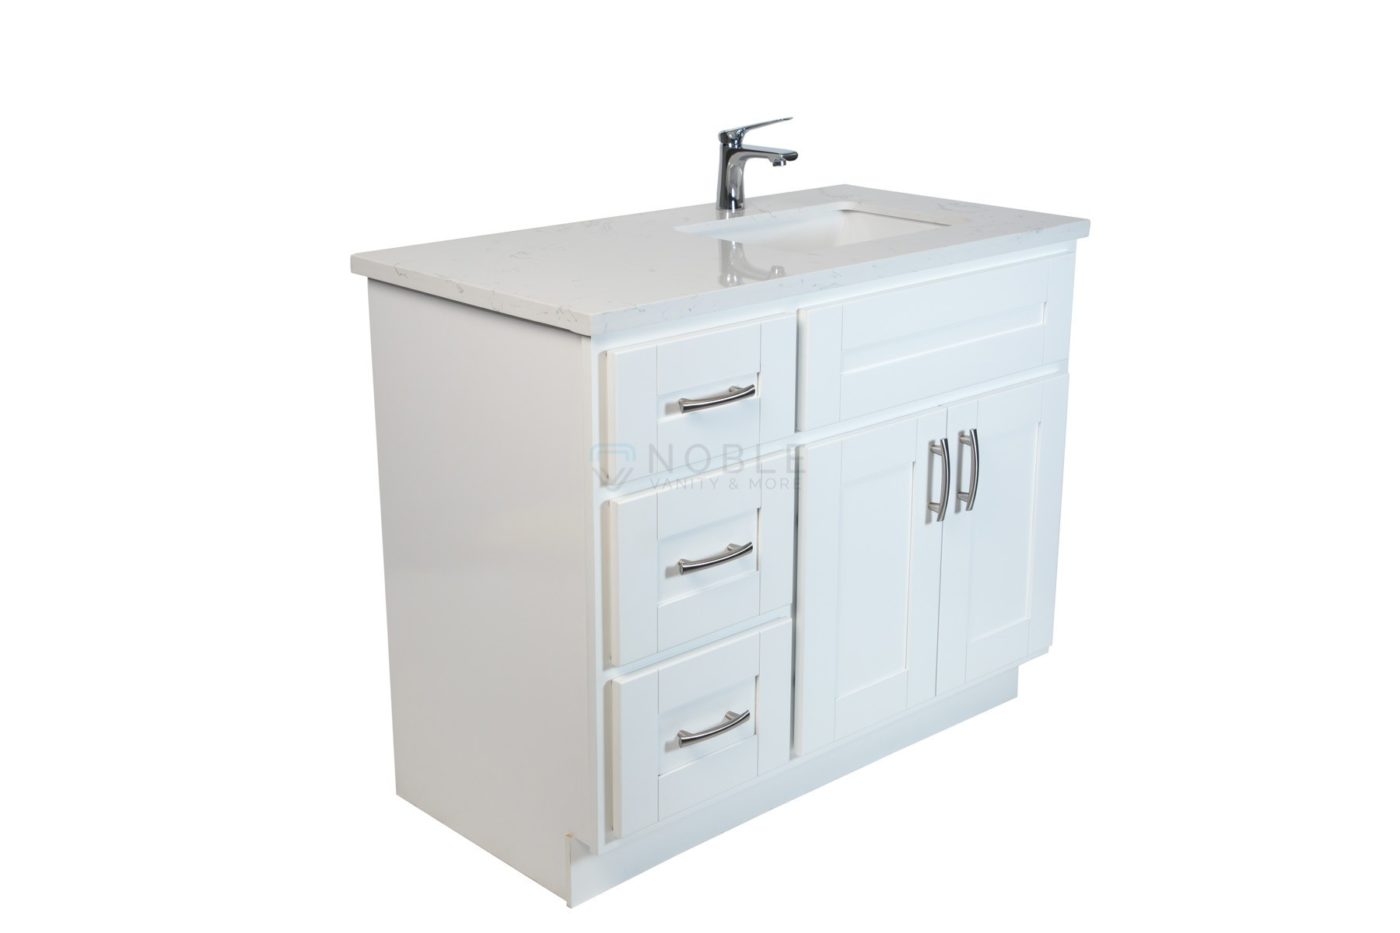 Bathroom Vanity With Drawers On The Left